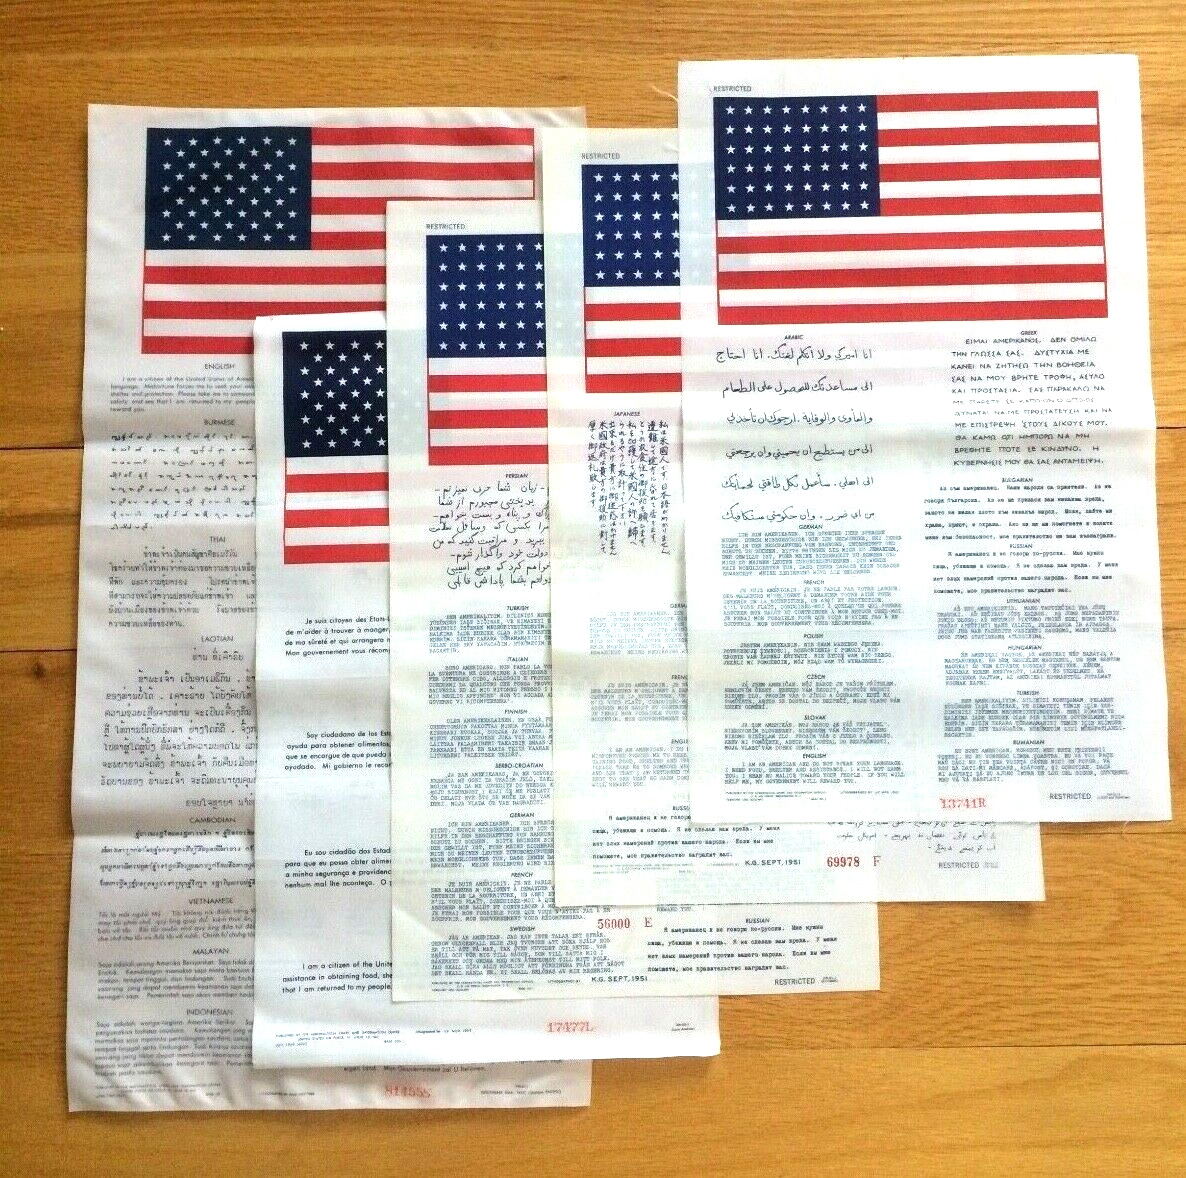 Europe Far East Russia Americas SE Asia Cold War US Military Blood Chit Set of 5